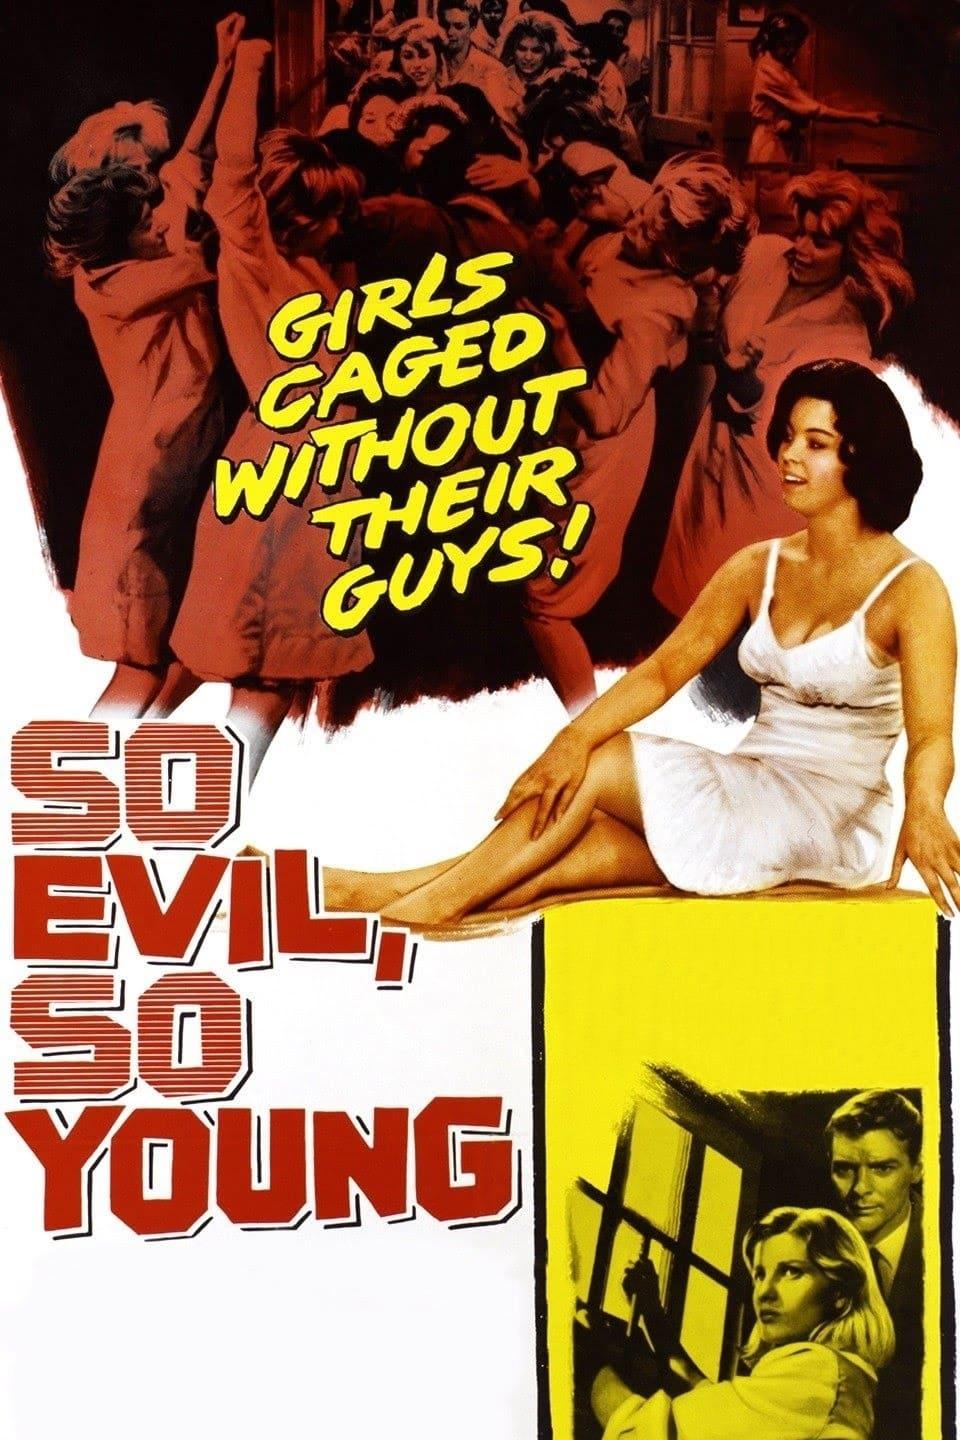 So Evil, So Young poster